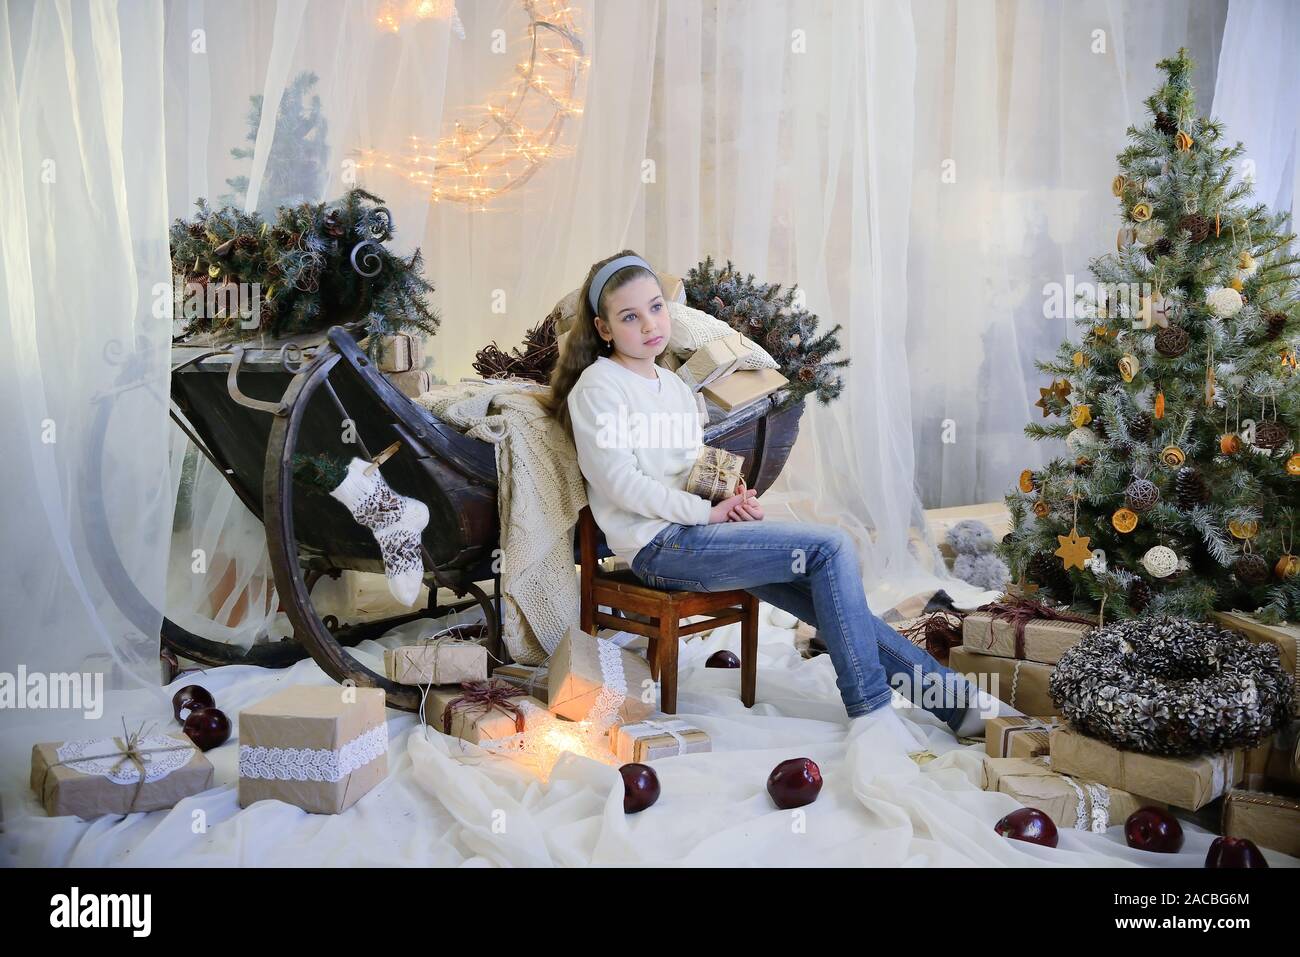 Merry Christmas and happy holidays! Cute dreamy girl sitting in interior of Christmas decorations pastel colors Stock Photo